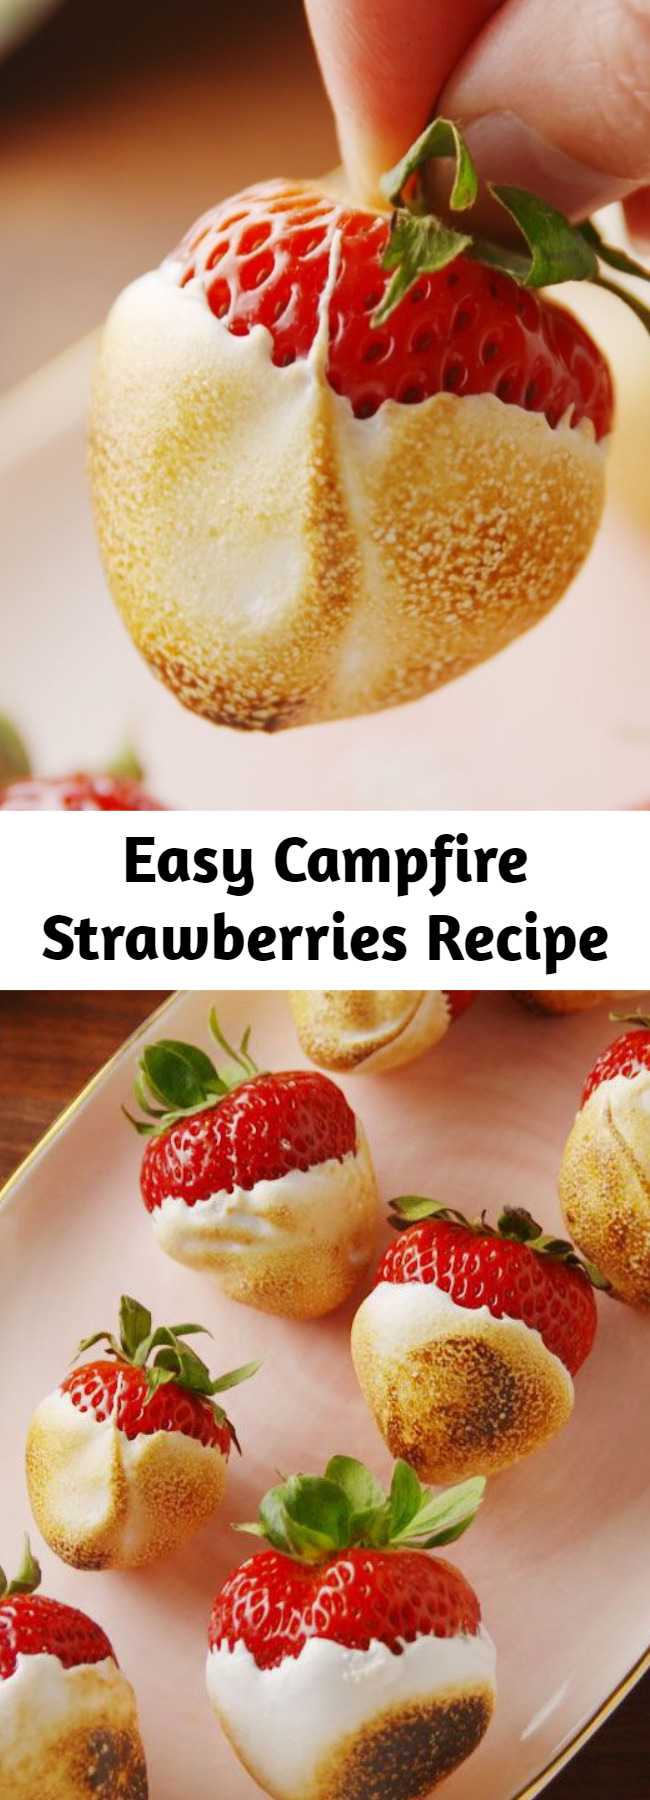 Easy Campfire Strawberries Recipe - If you're obsessed with s'mores, one reason you love them is for the toasted marshmallow flavor. These strawberries have that and so much more. They're dunked in melty marshmallow fluff, then torched over a campfire. They're healthy cuz they're fruit, right?! Check out this super easy for the best campfire strawberries.